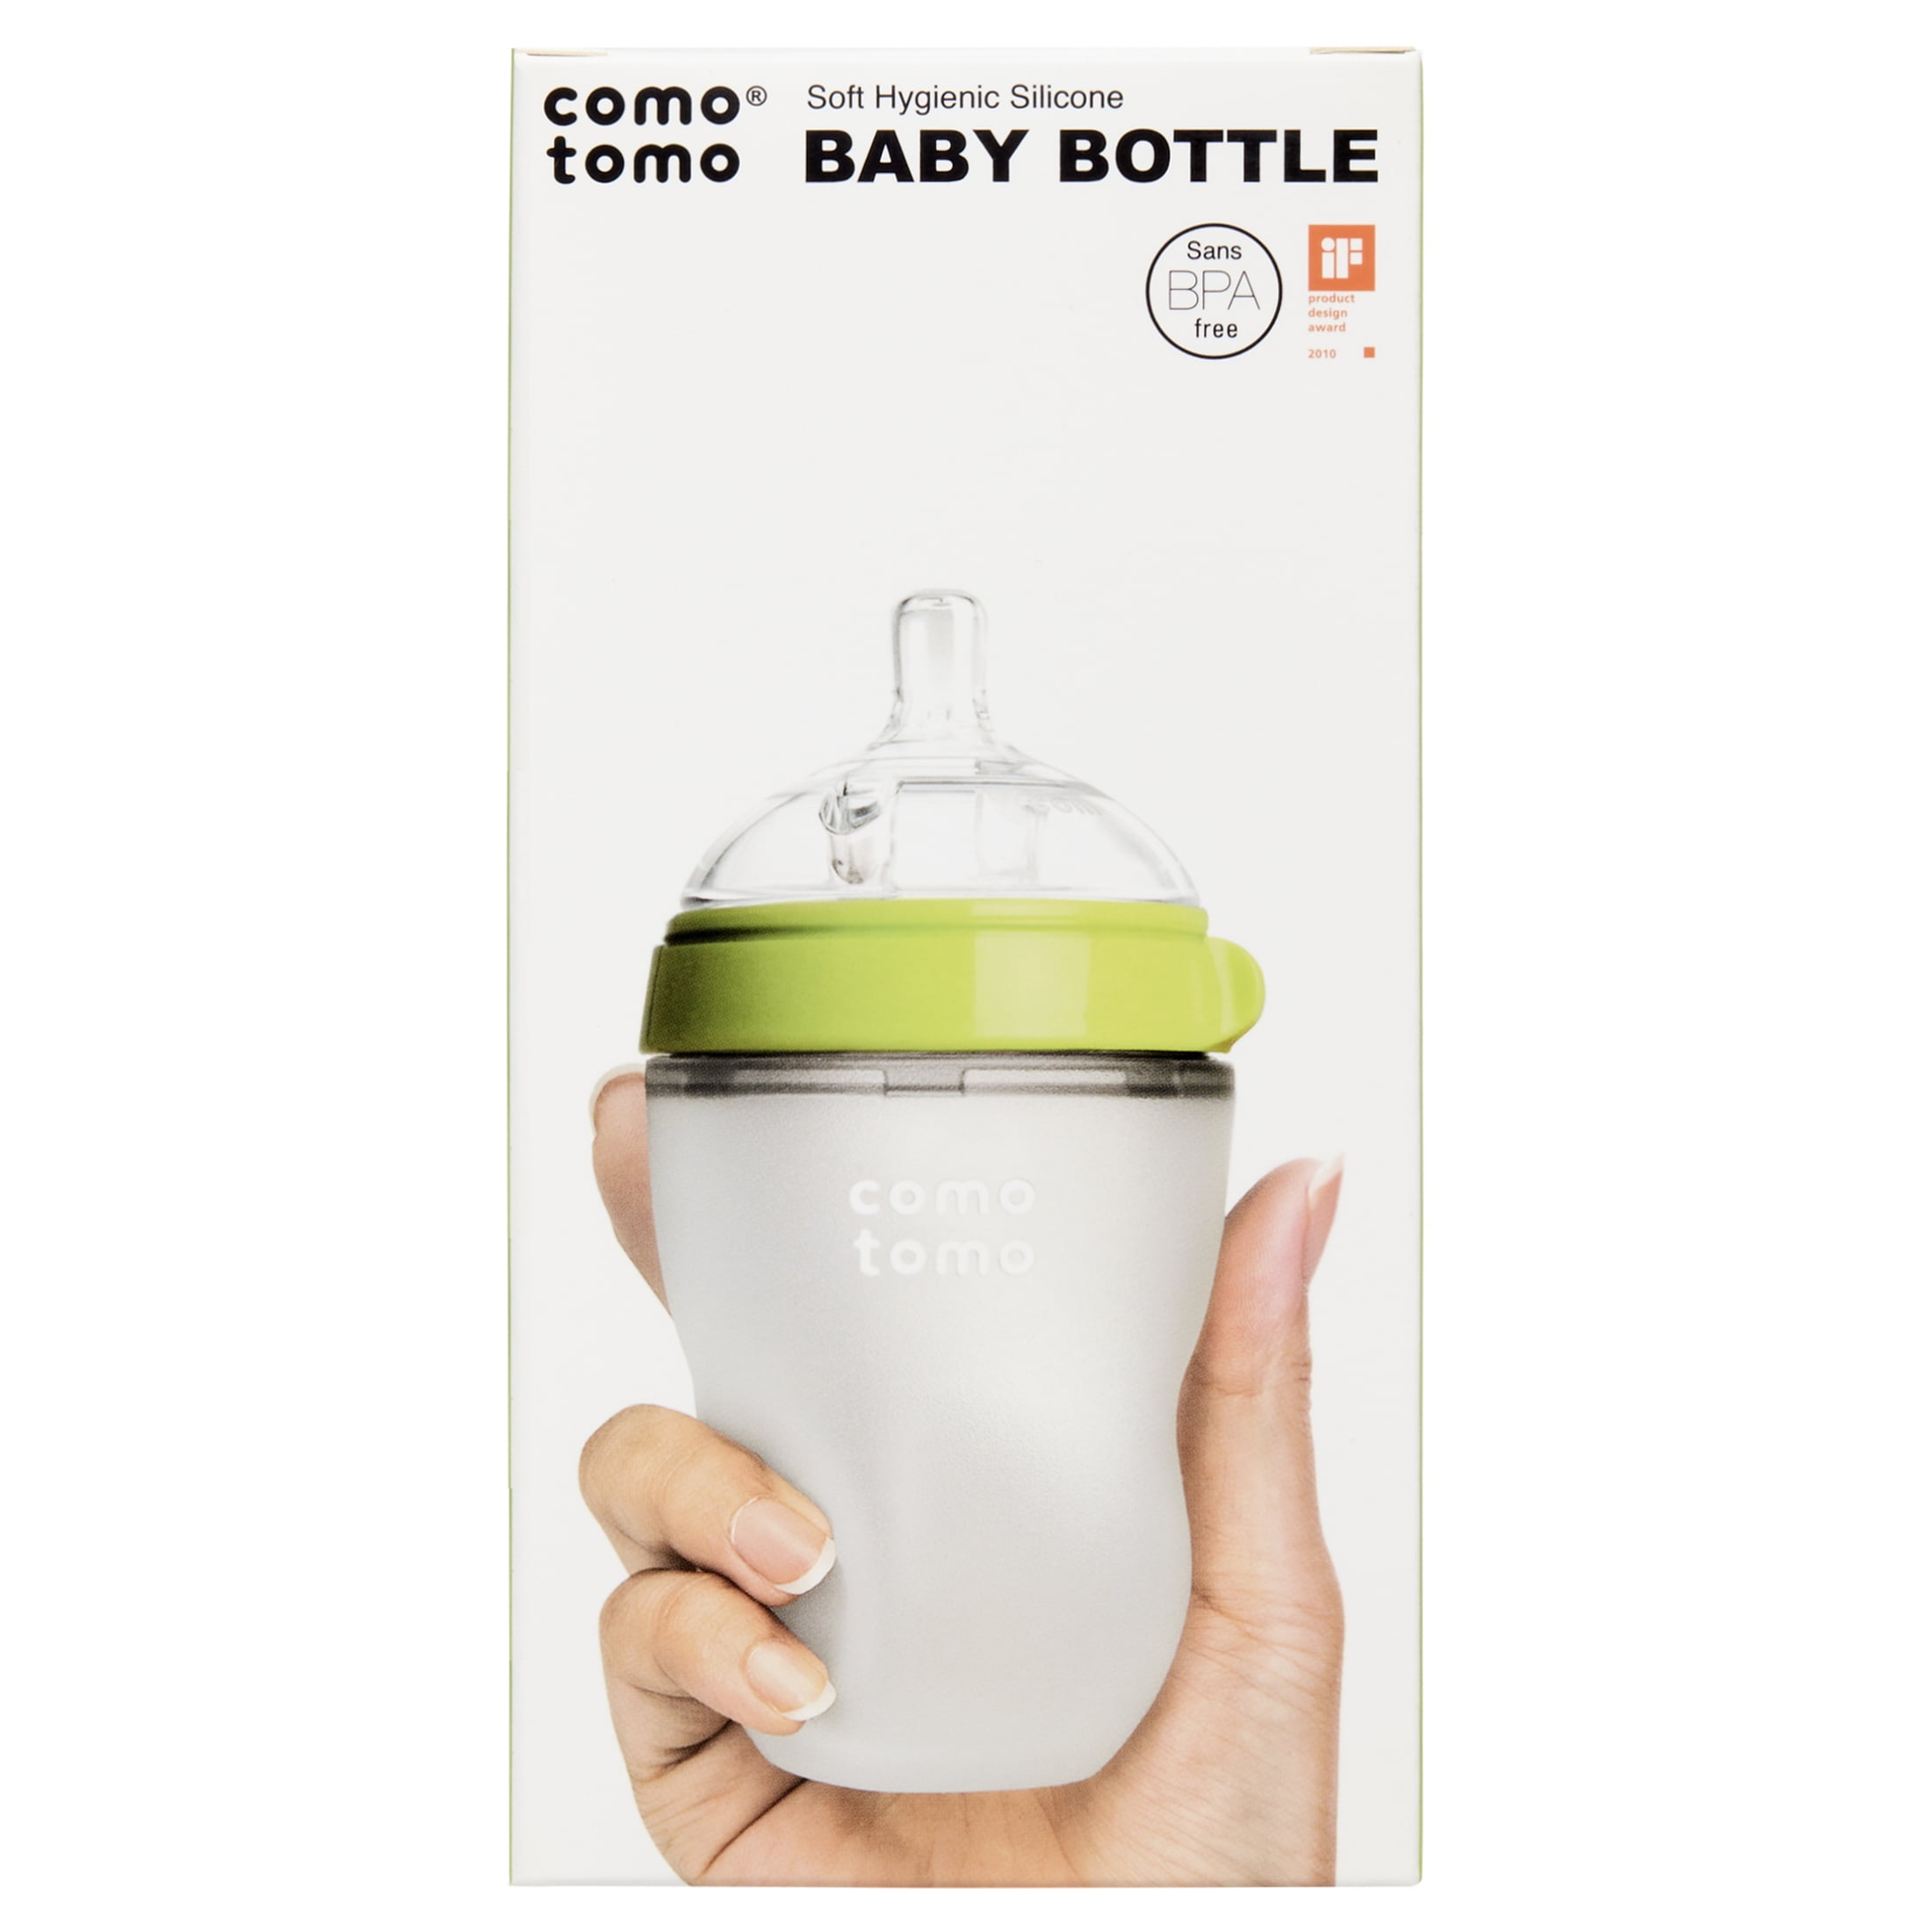 Playtex Baby VentAire Complete Tummy Comfort Baby Bottles, 6 oz, 3